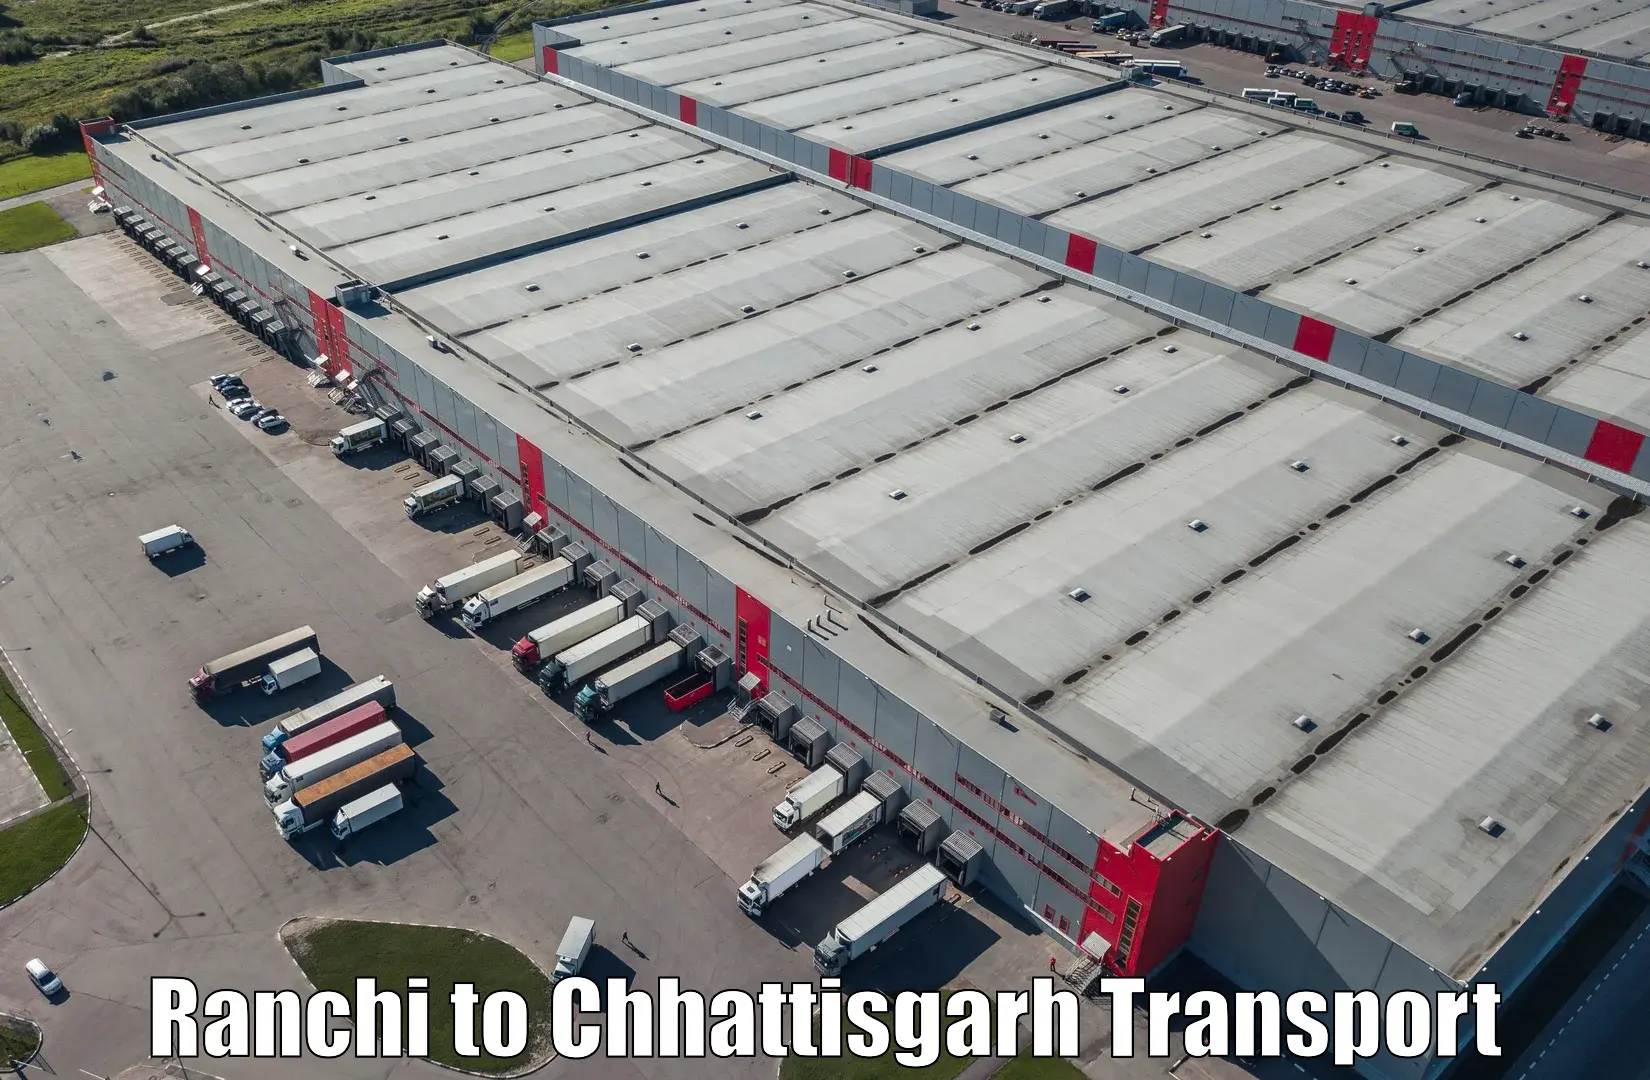 Container transport service Ranchi to Dhamtari